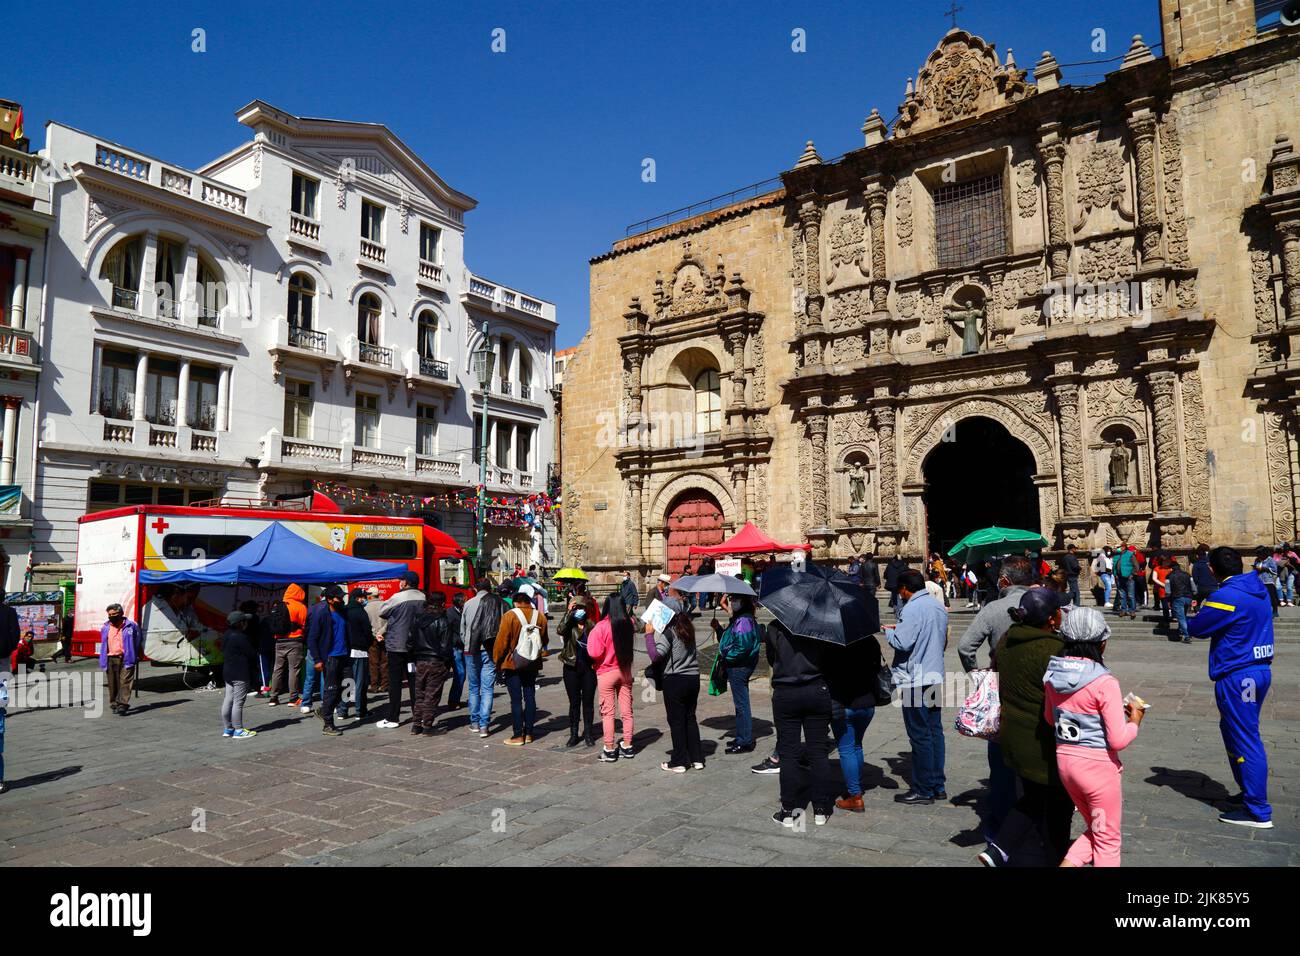 La Paz, Bolivia. 31st July 2022. People queue outside a mobile health clinic offering free health and dental checks / consultations organised by the La Paz city authorities in Plaza San Francisco in the city centre. Behind is San Francisco church, the most important and impressive colonial church in the city. Stock Photo